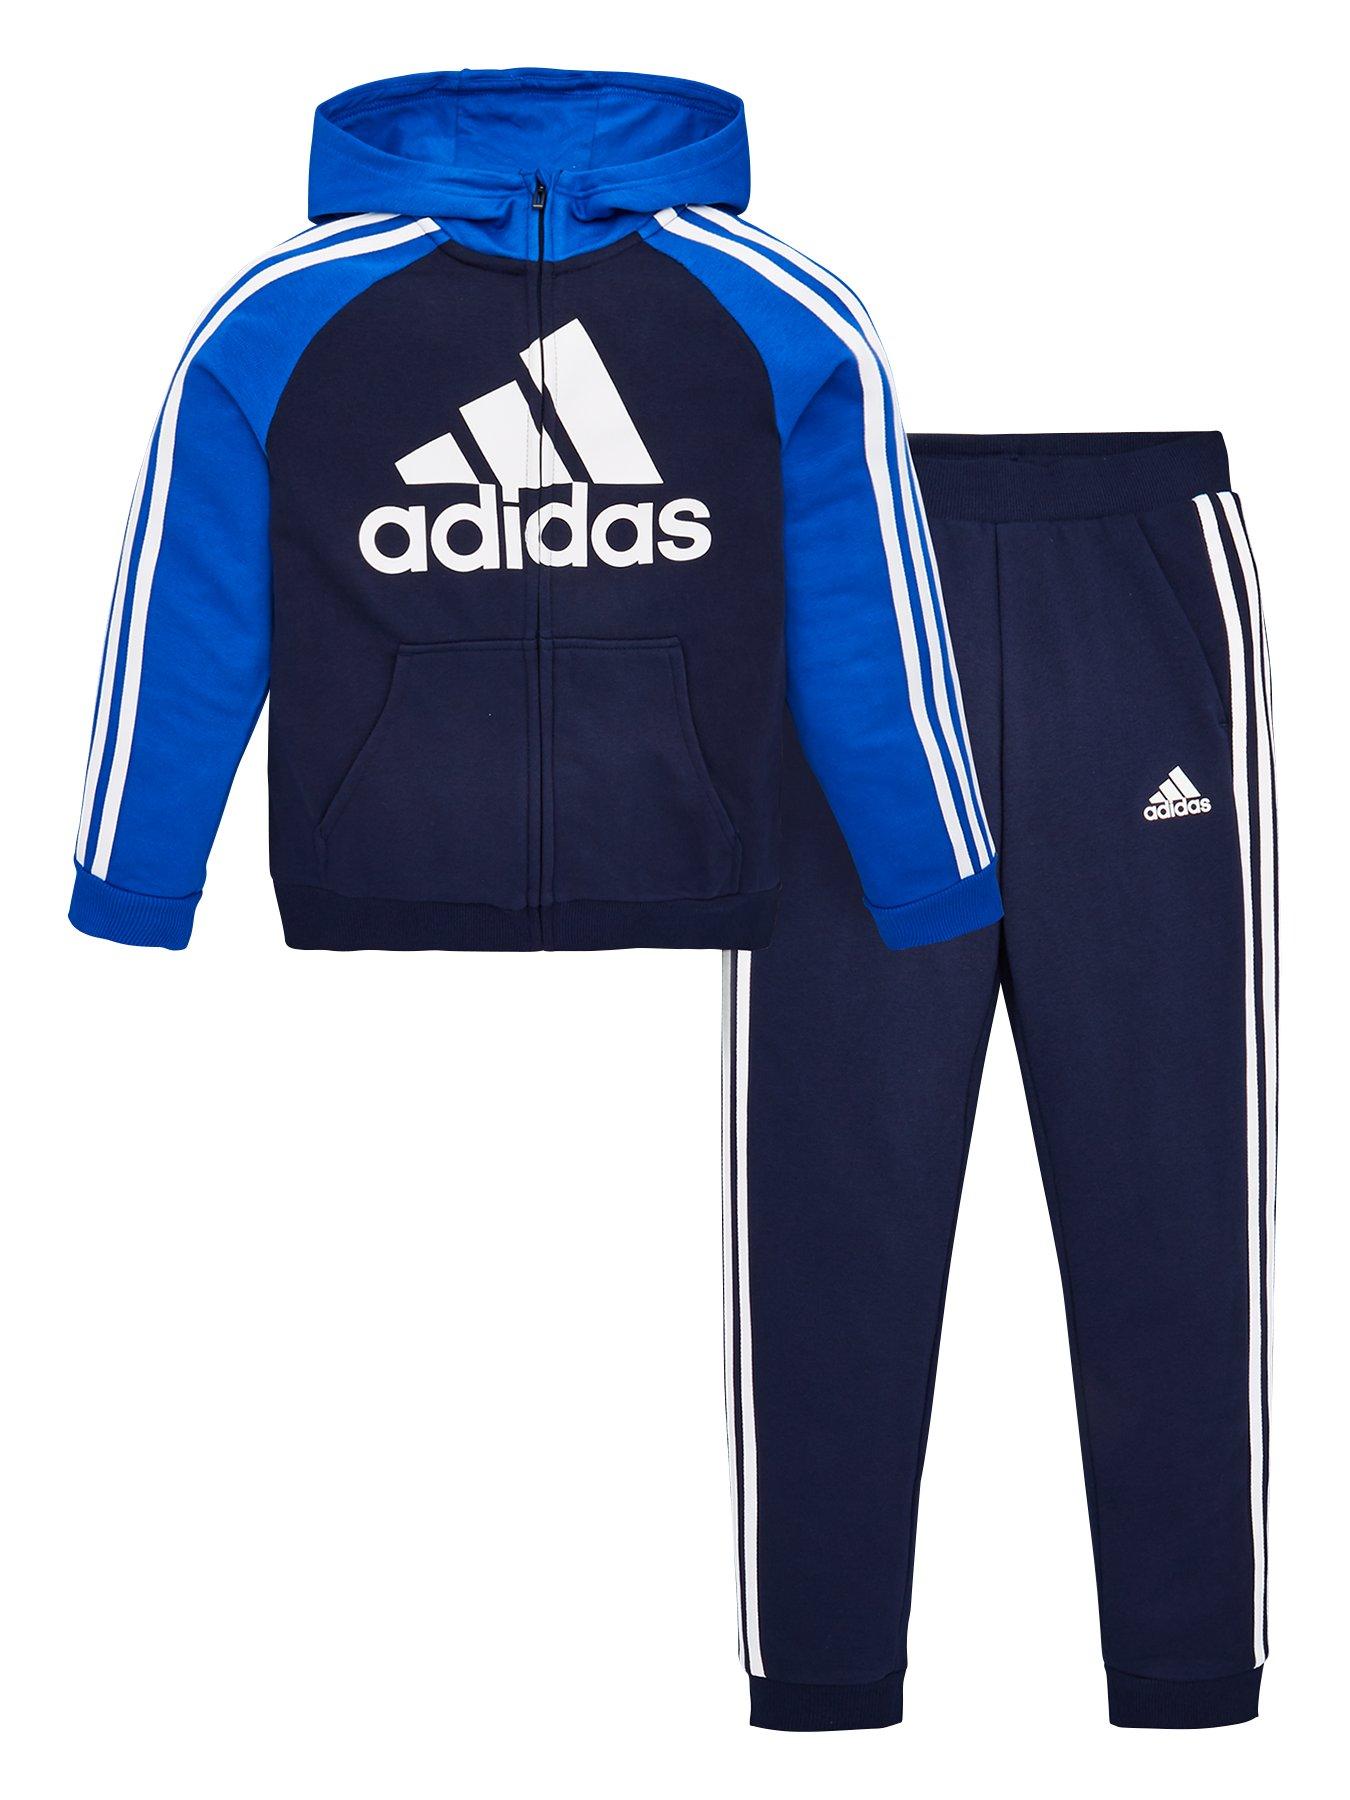 adidas hooded jogger tracksuit